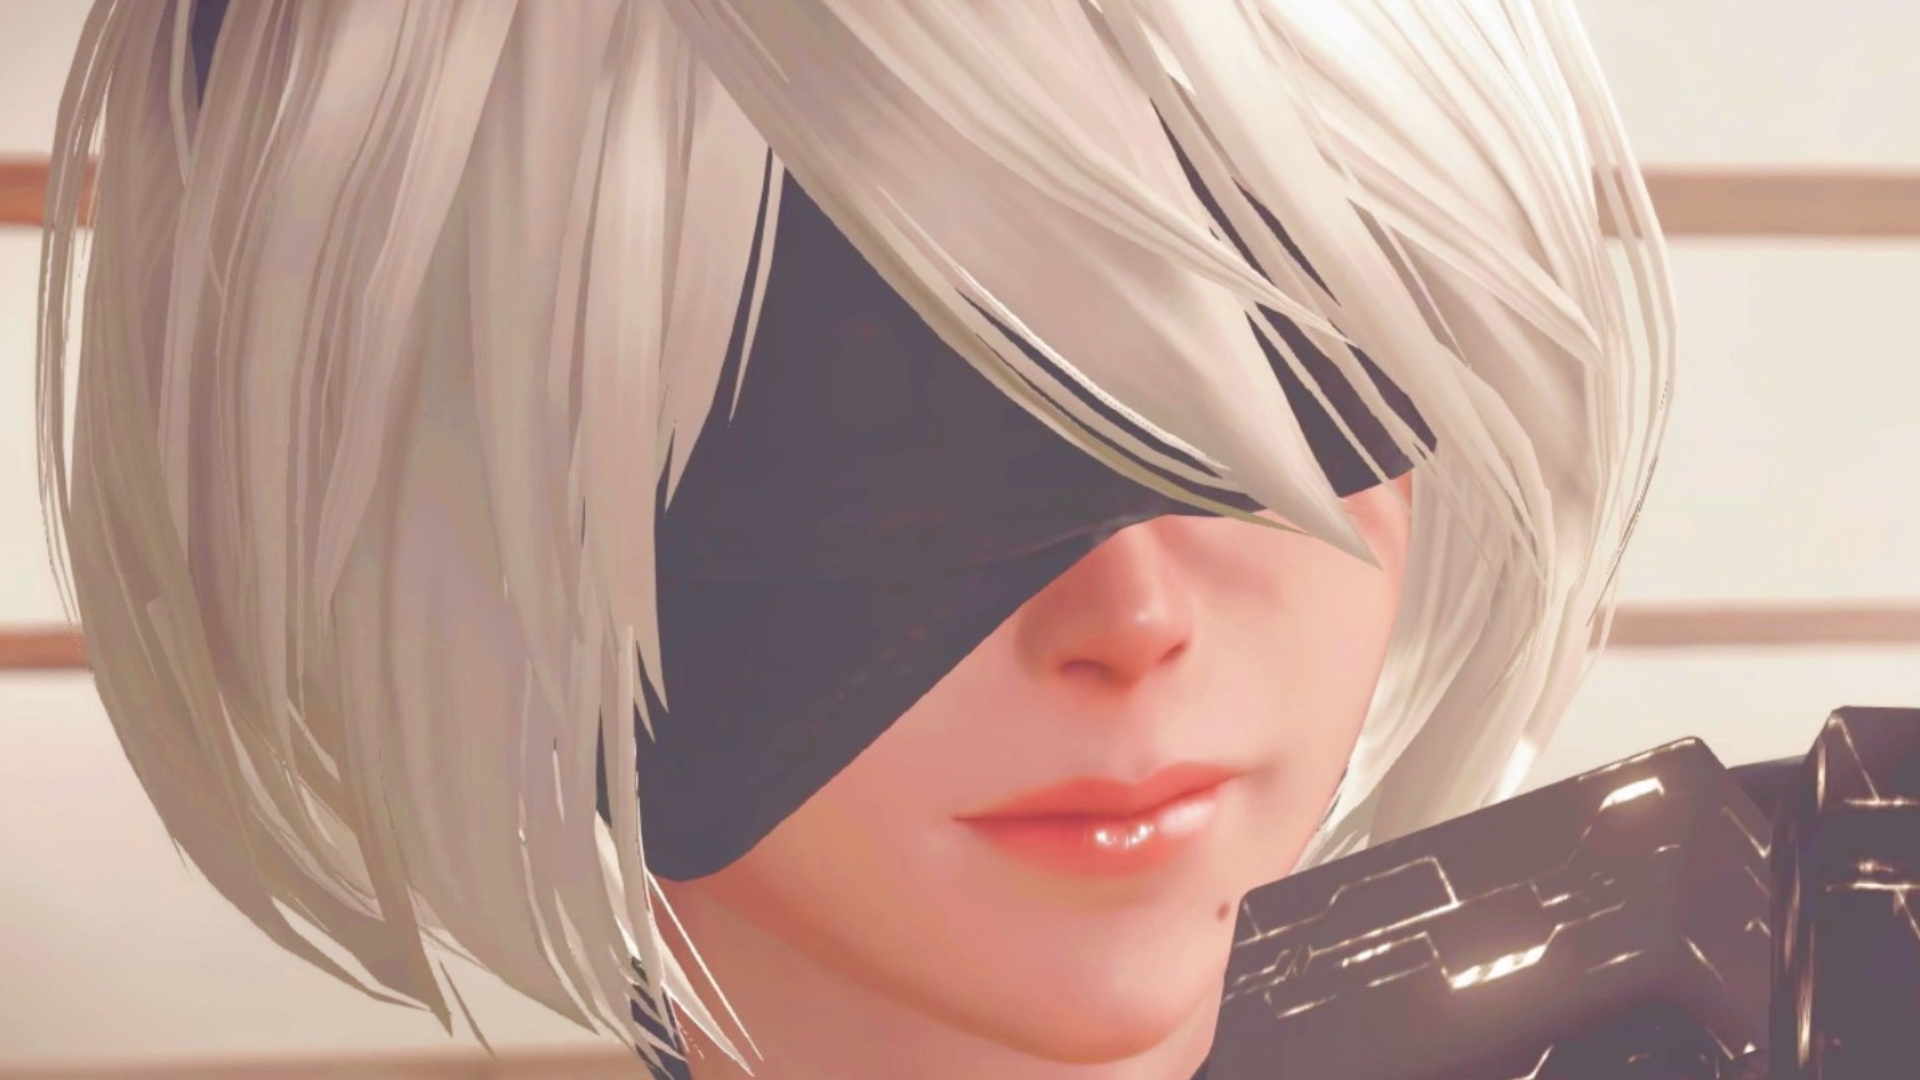 Nier Automata's 2B gets new costumes for X-rated anime crossover